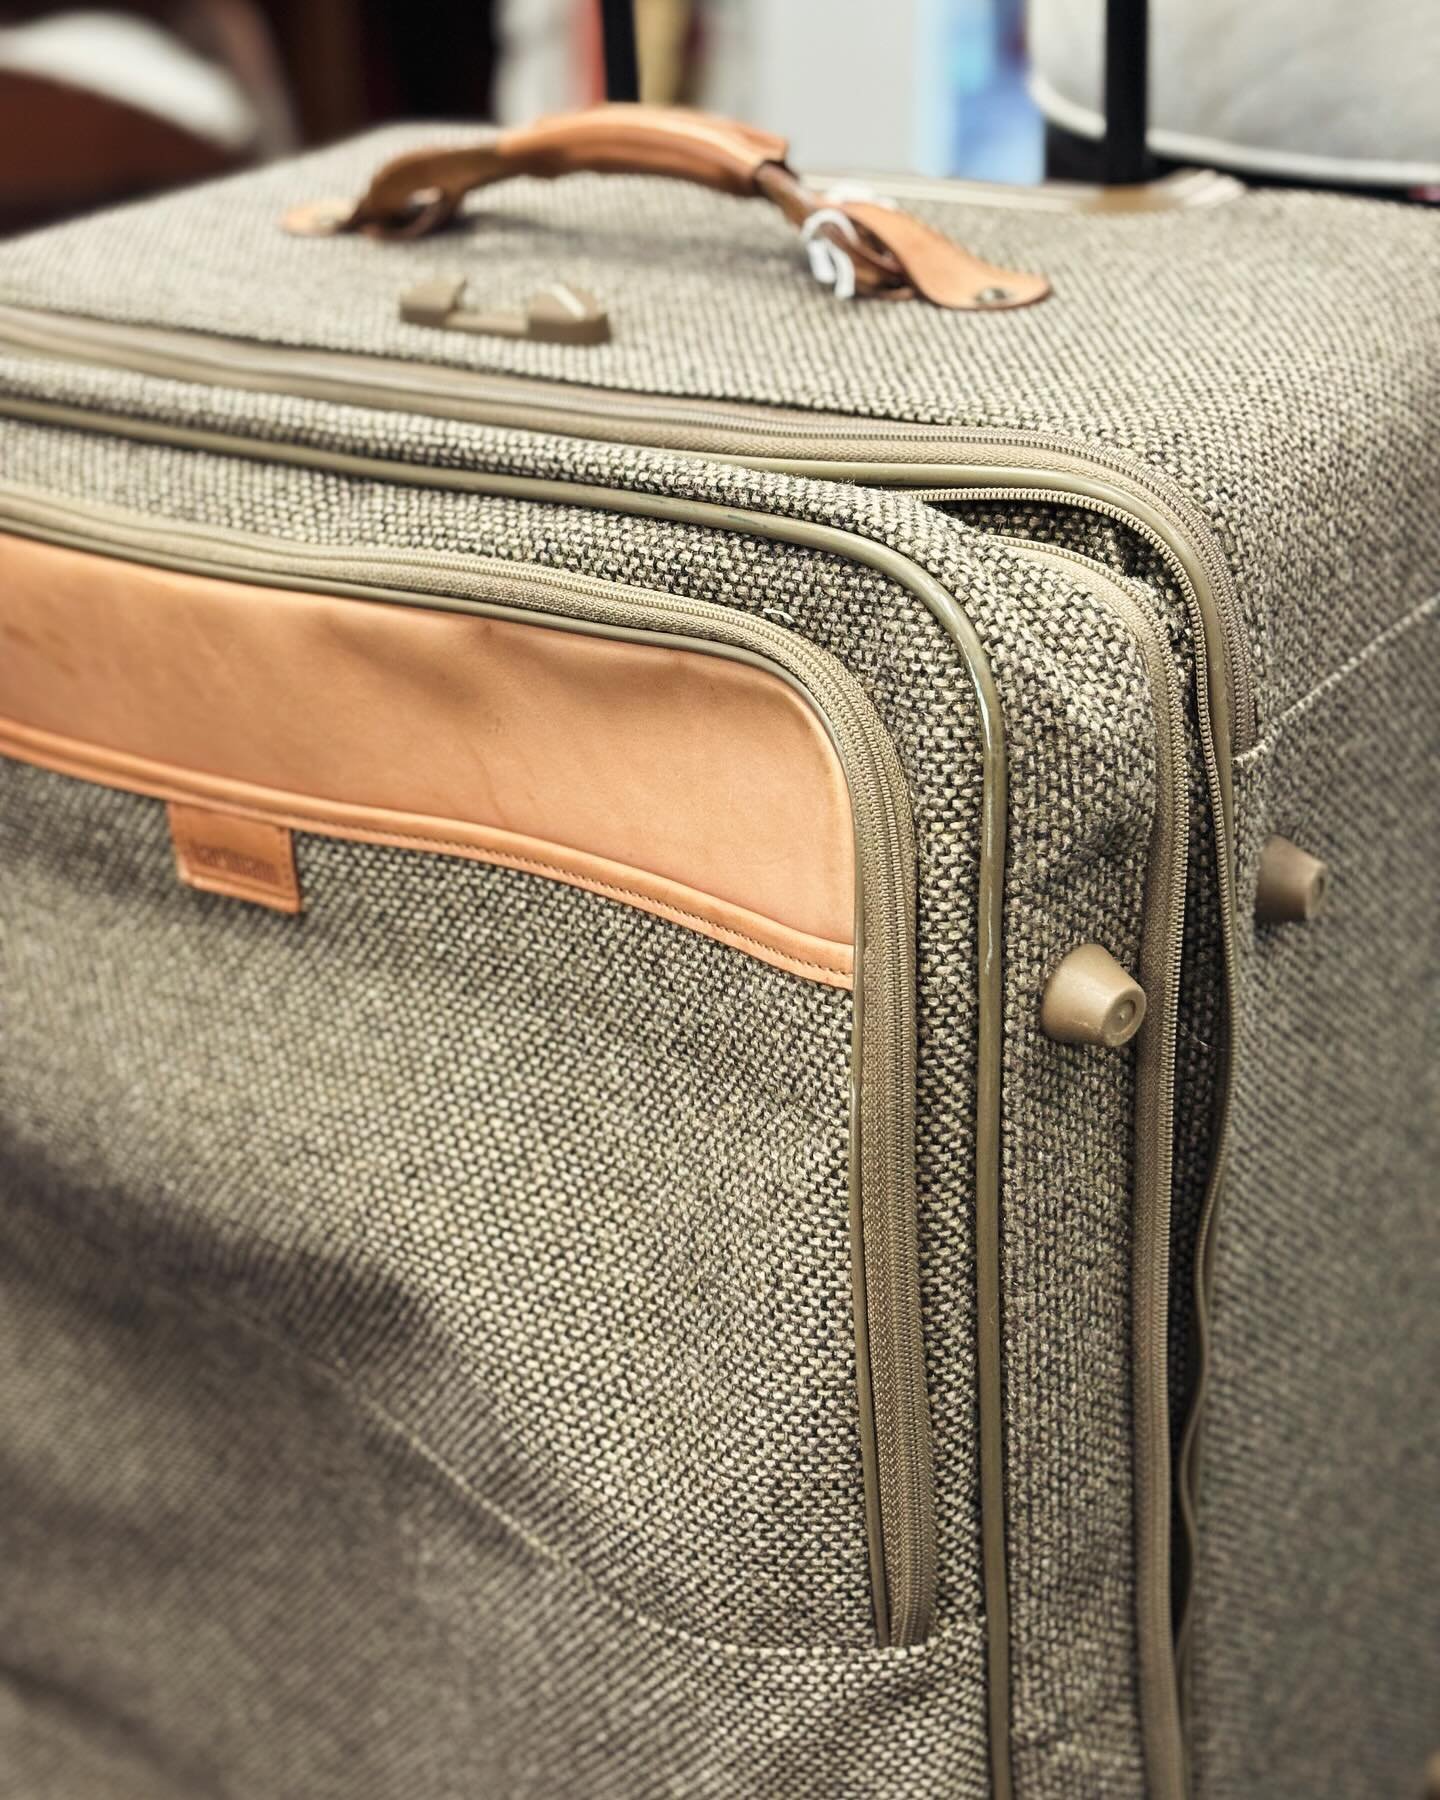 Anyone with upcoming vacation plans - you NEED to check this out ✈️🧳💺This Hartmann tweed suitcase with leather details can fit like a month&rsquo;s worth of stuff in it and is super clean inside! Stylish, twice-extendable, all the accessory bags, a